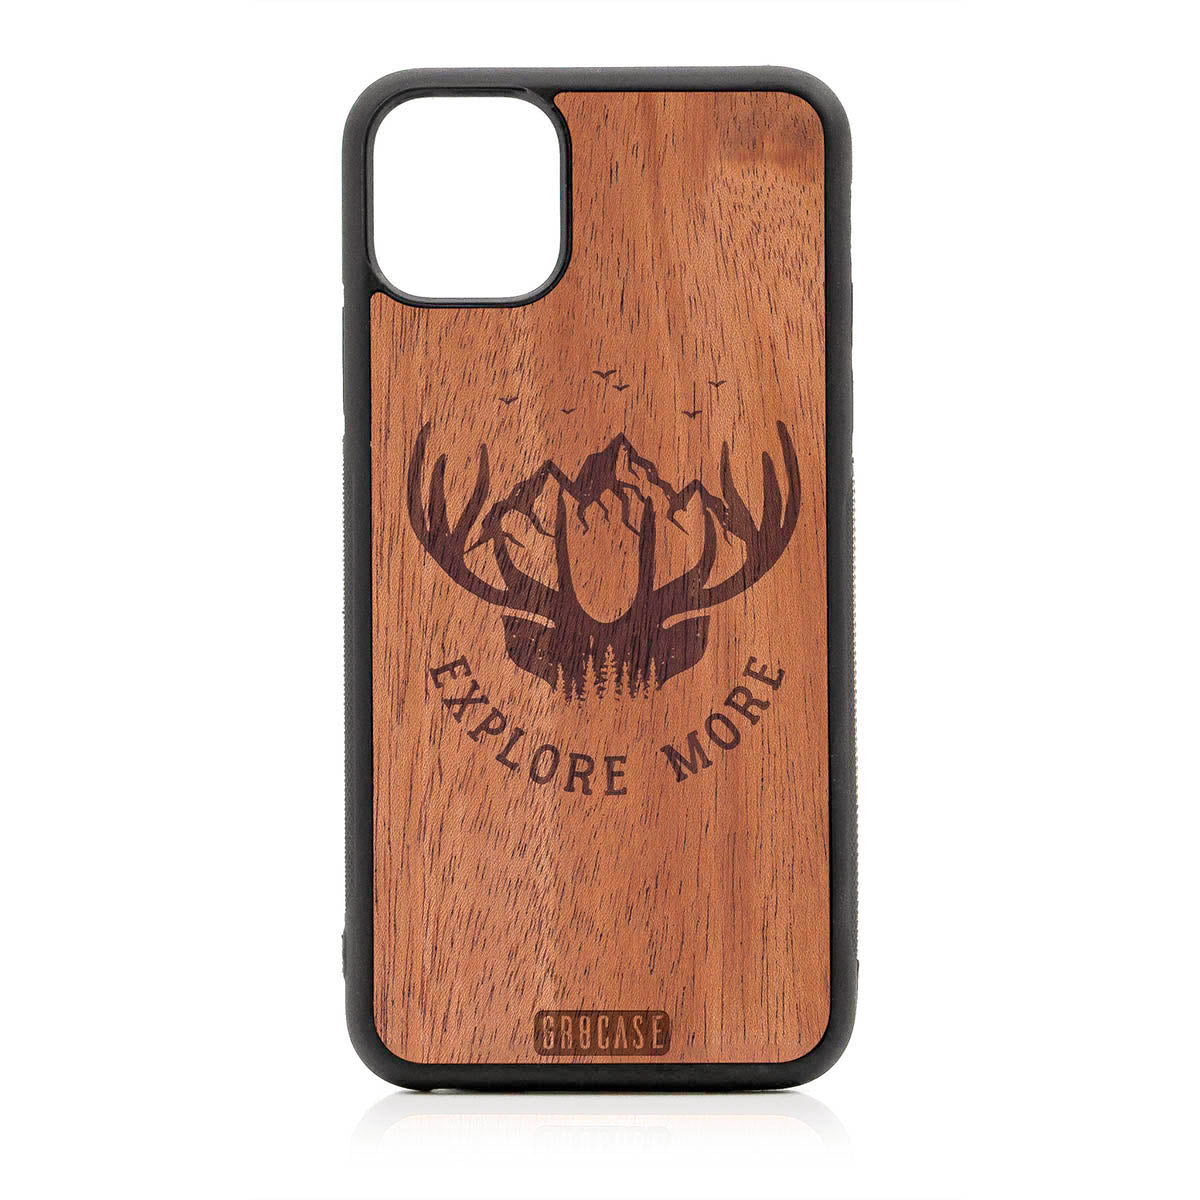 Explore More (Forest, Mountains & Antlers) Design Wood Case For iPhone 11 Pro Max by GR8CASE